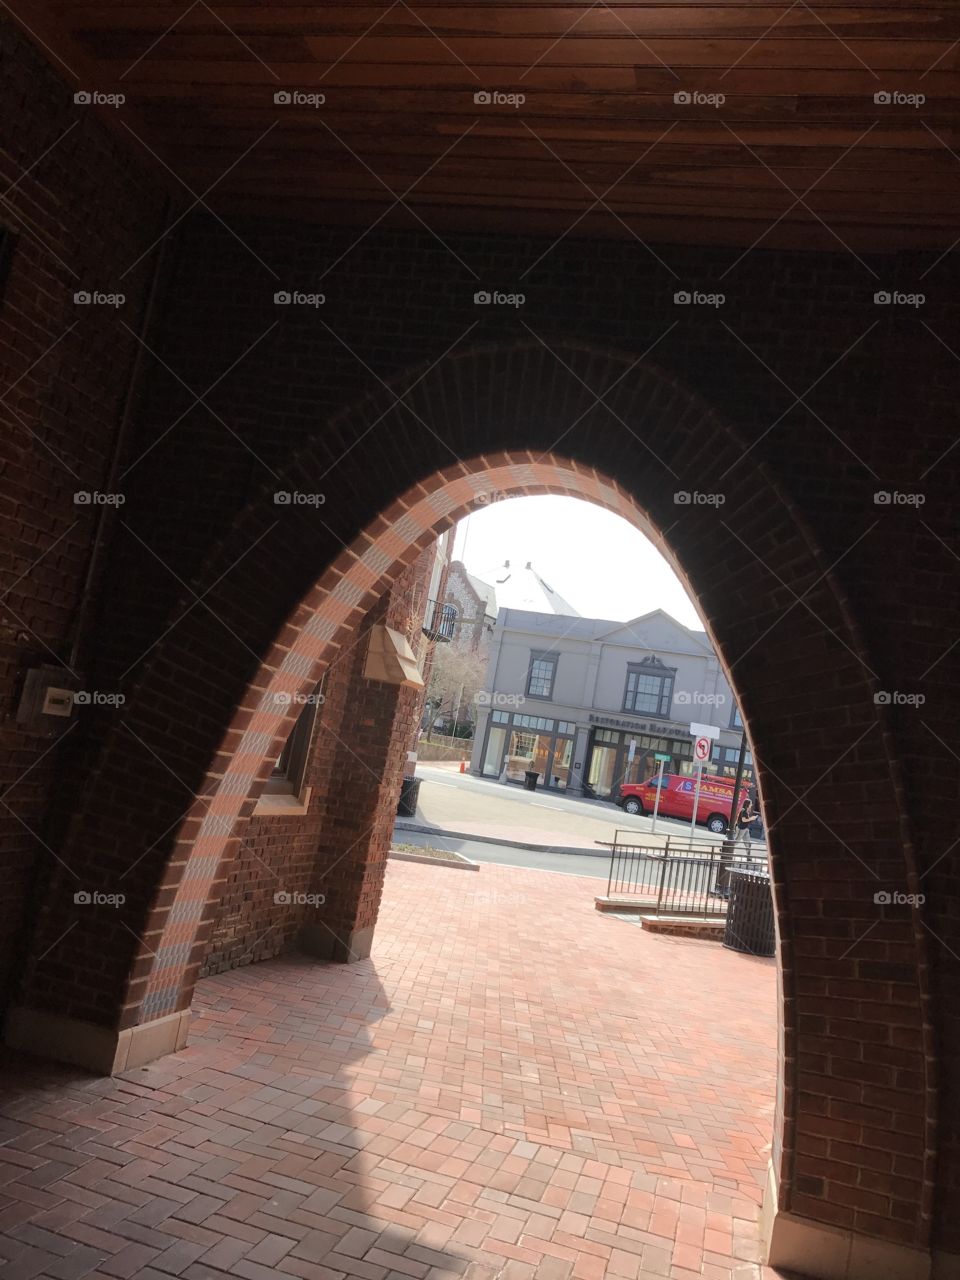 Through the archway